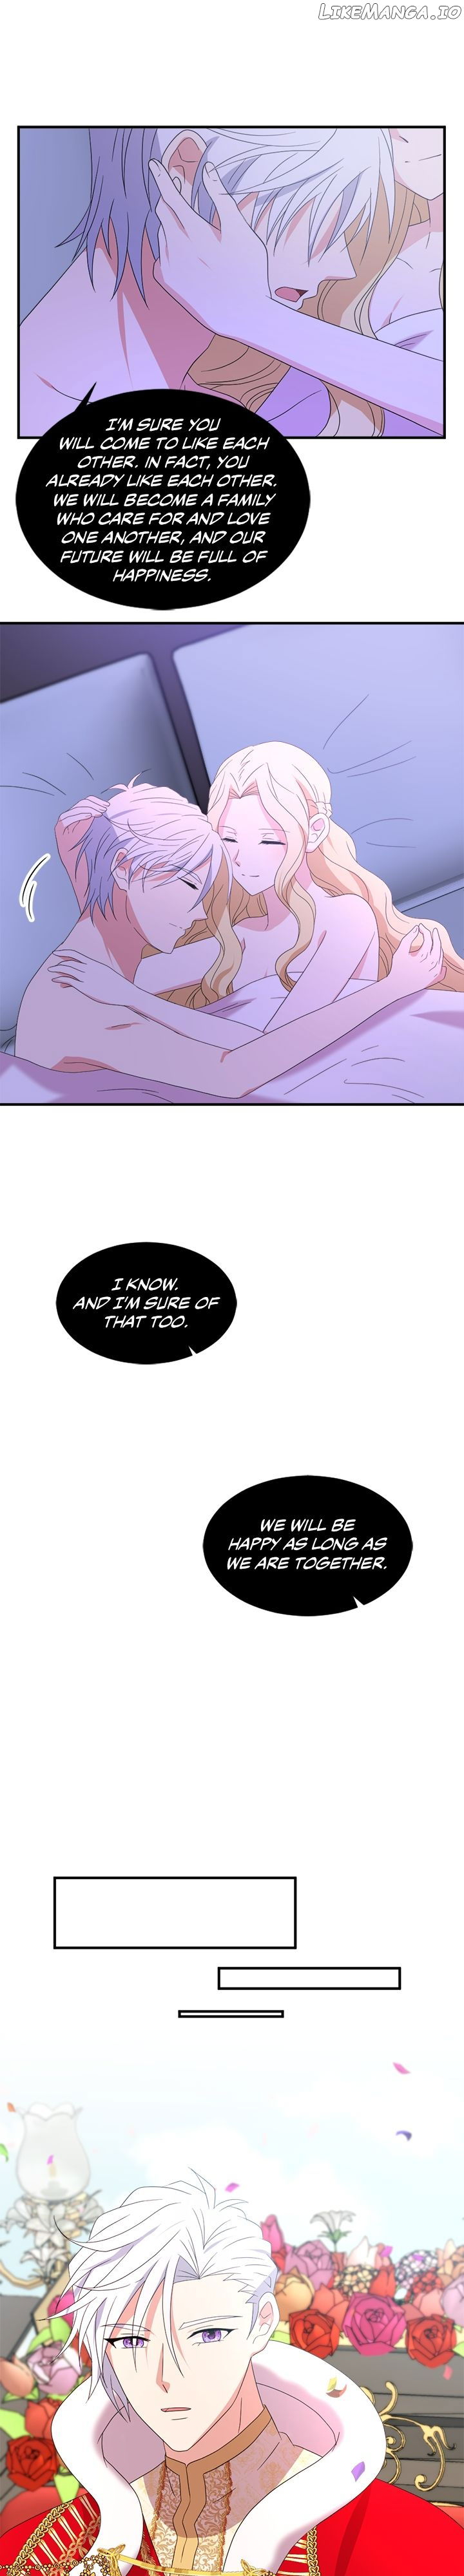 Between Two Lips Chapter 128 page 10